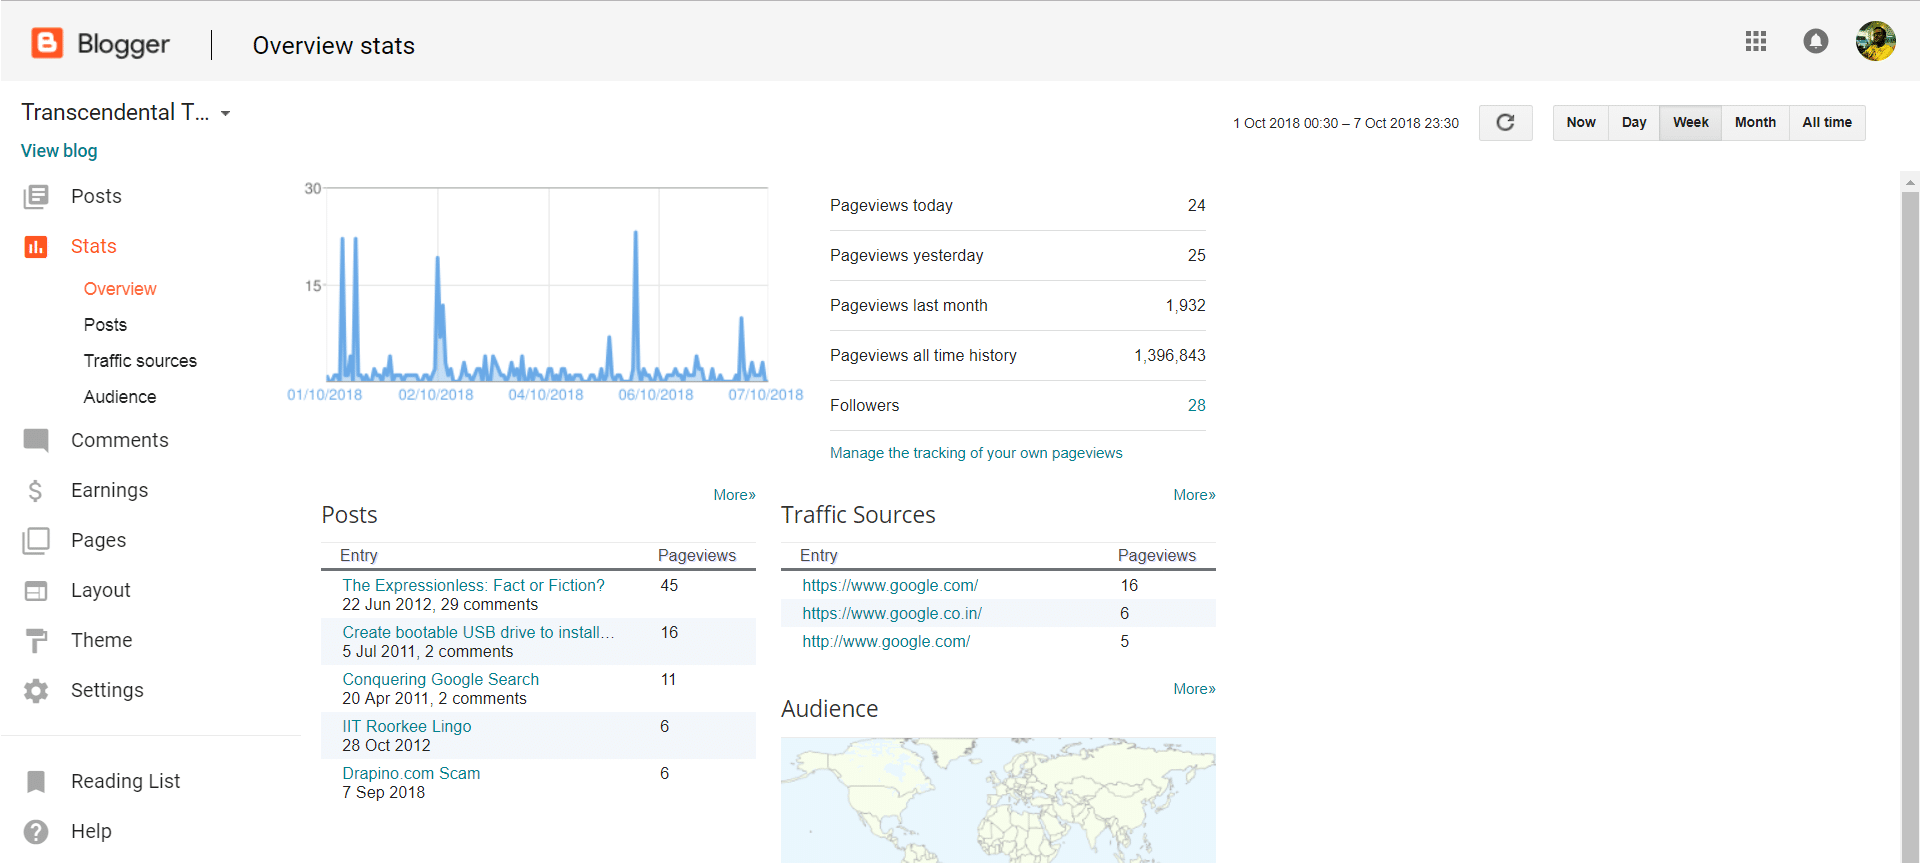 Blogger dashboard with statistics and other options